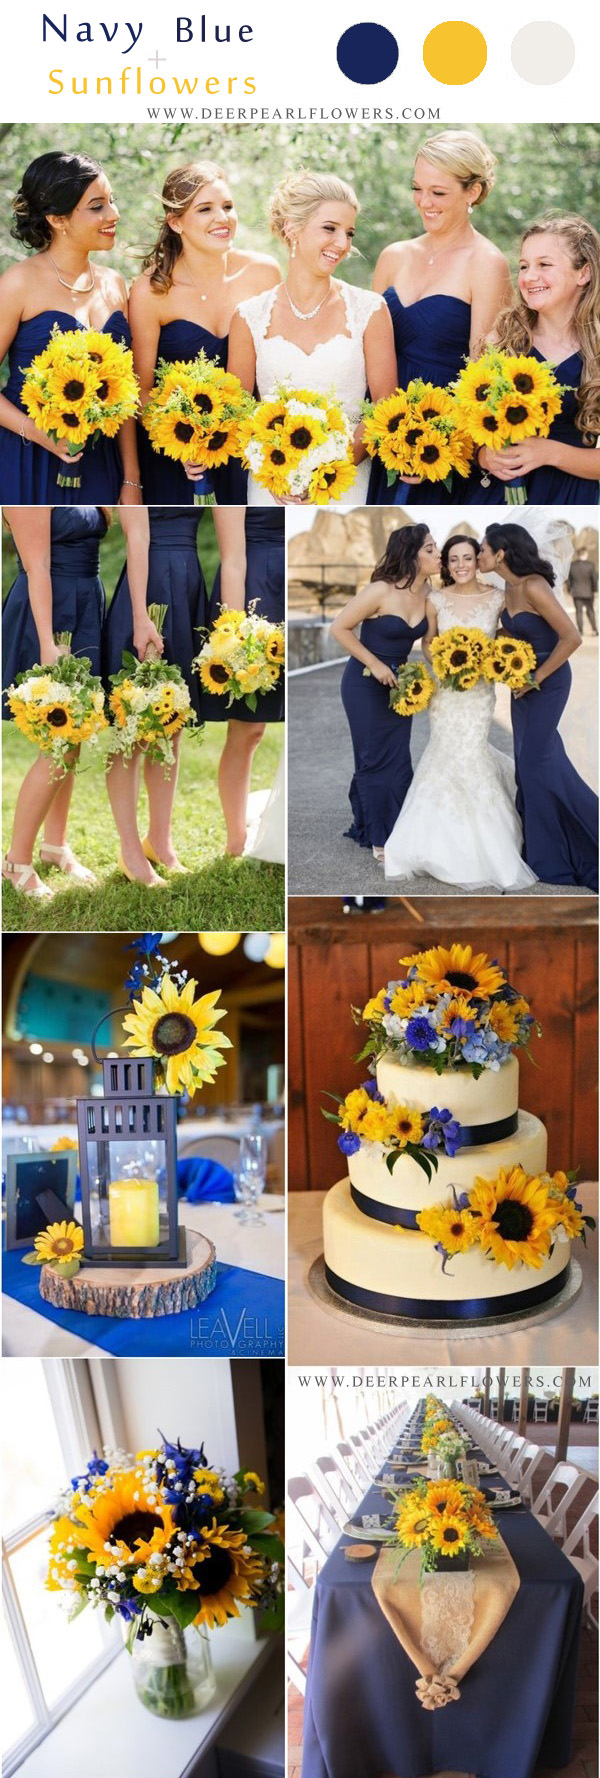 Marine navy blue and sunflower yellow rustic country wedding ideas